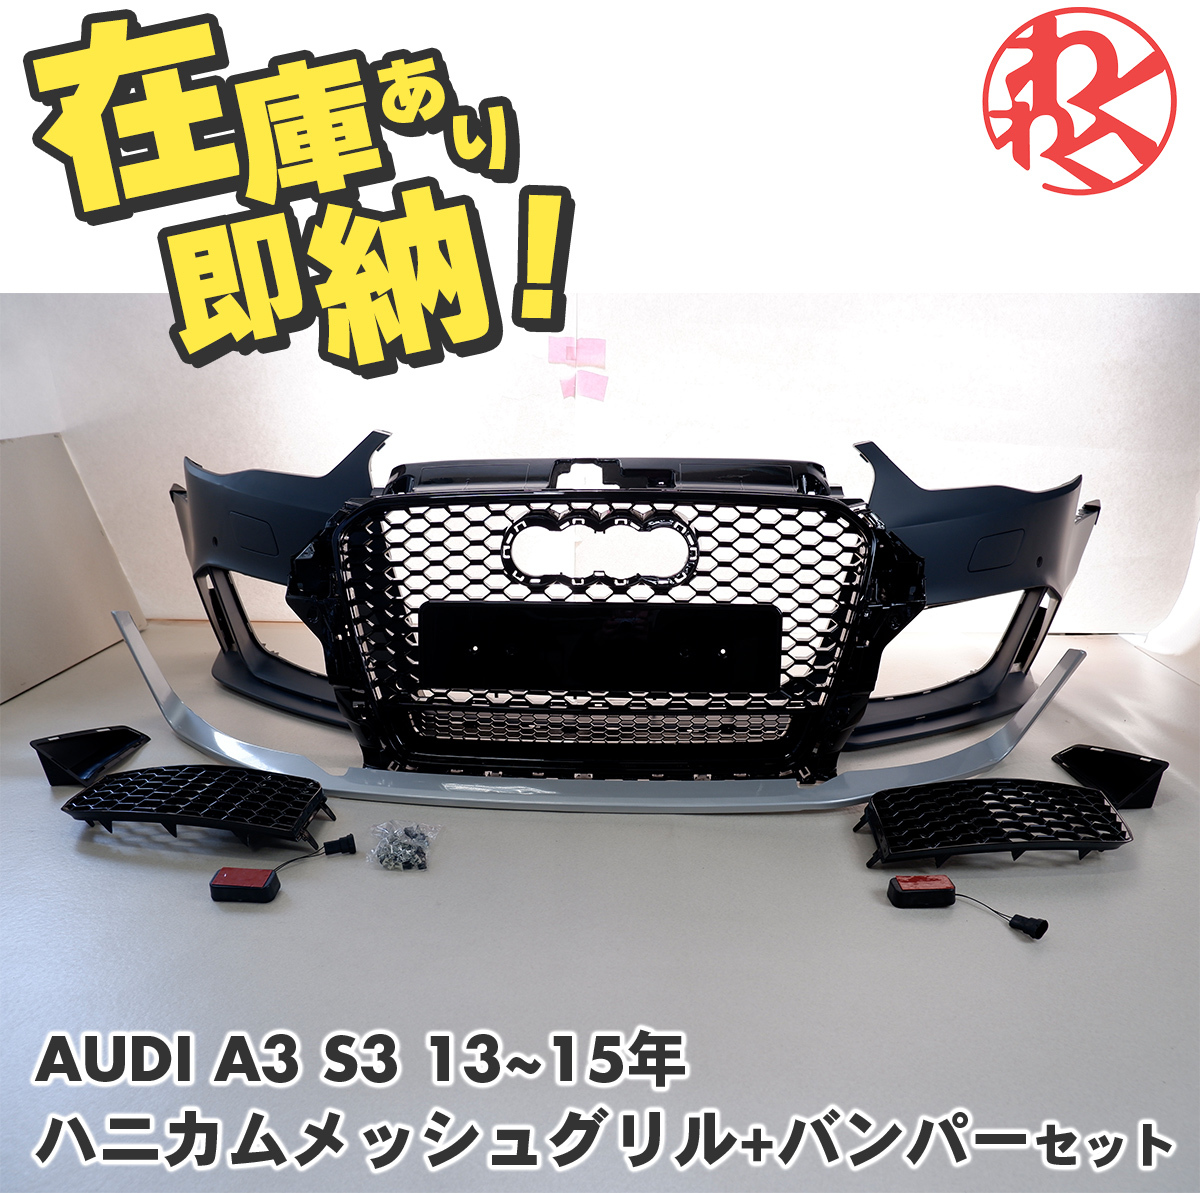  Audi A3 S3 8V honeycomb mesh grille RS look honeycomb grill RS style bumper aero AUDI YEASUN made 